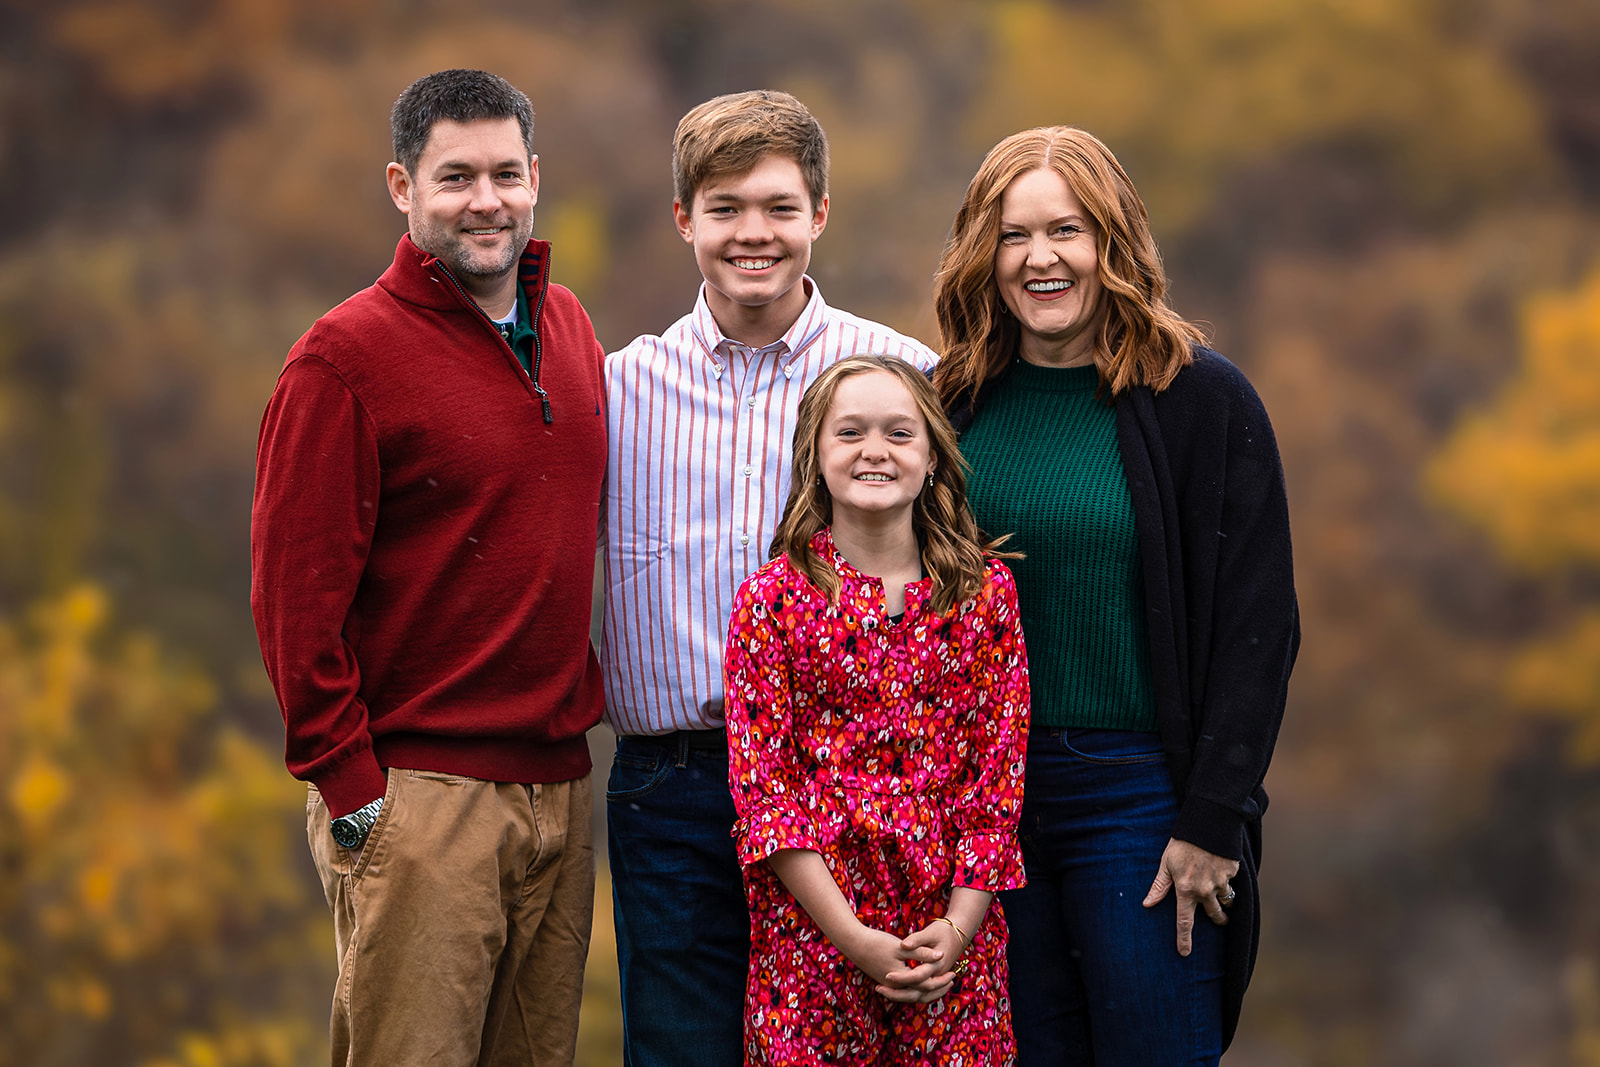 Vibrant Fall Foliage Family Portraits in West Salem, WI by Jeff Wiswell of J.L. Wiswell Photography of Onalaska, WI